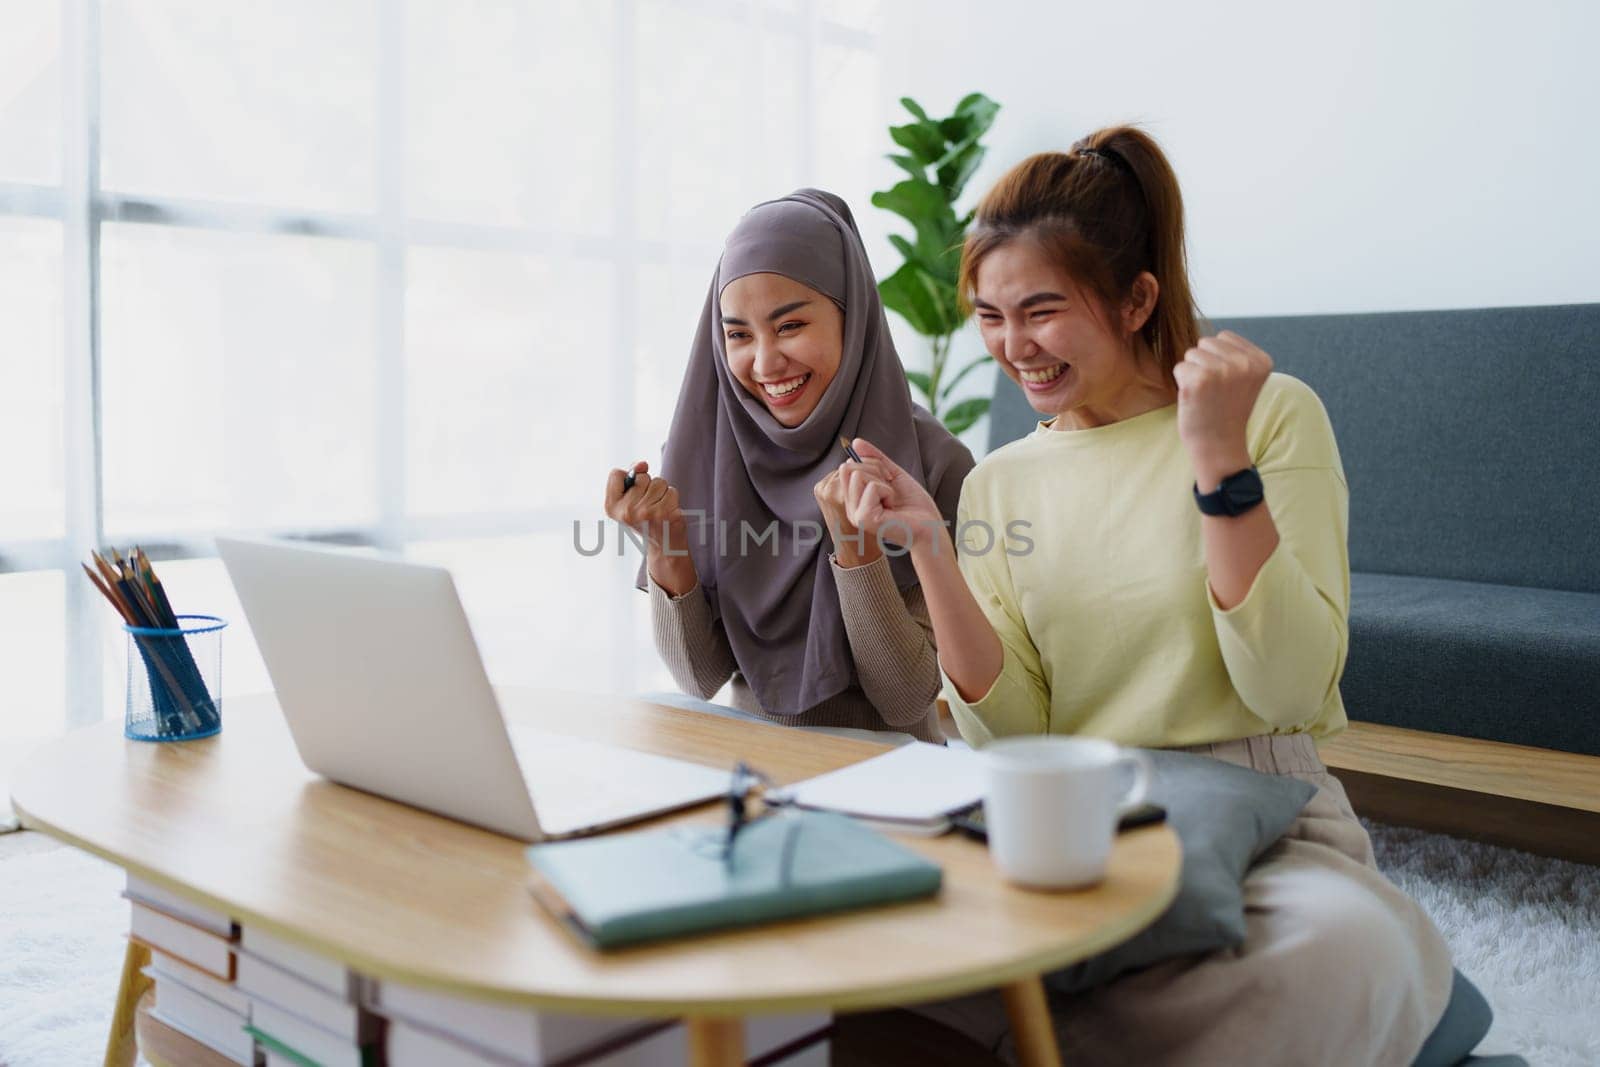 Muslim undergraduate students and Asian women express their joy after completing online study using a computer. by Manastrong